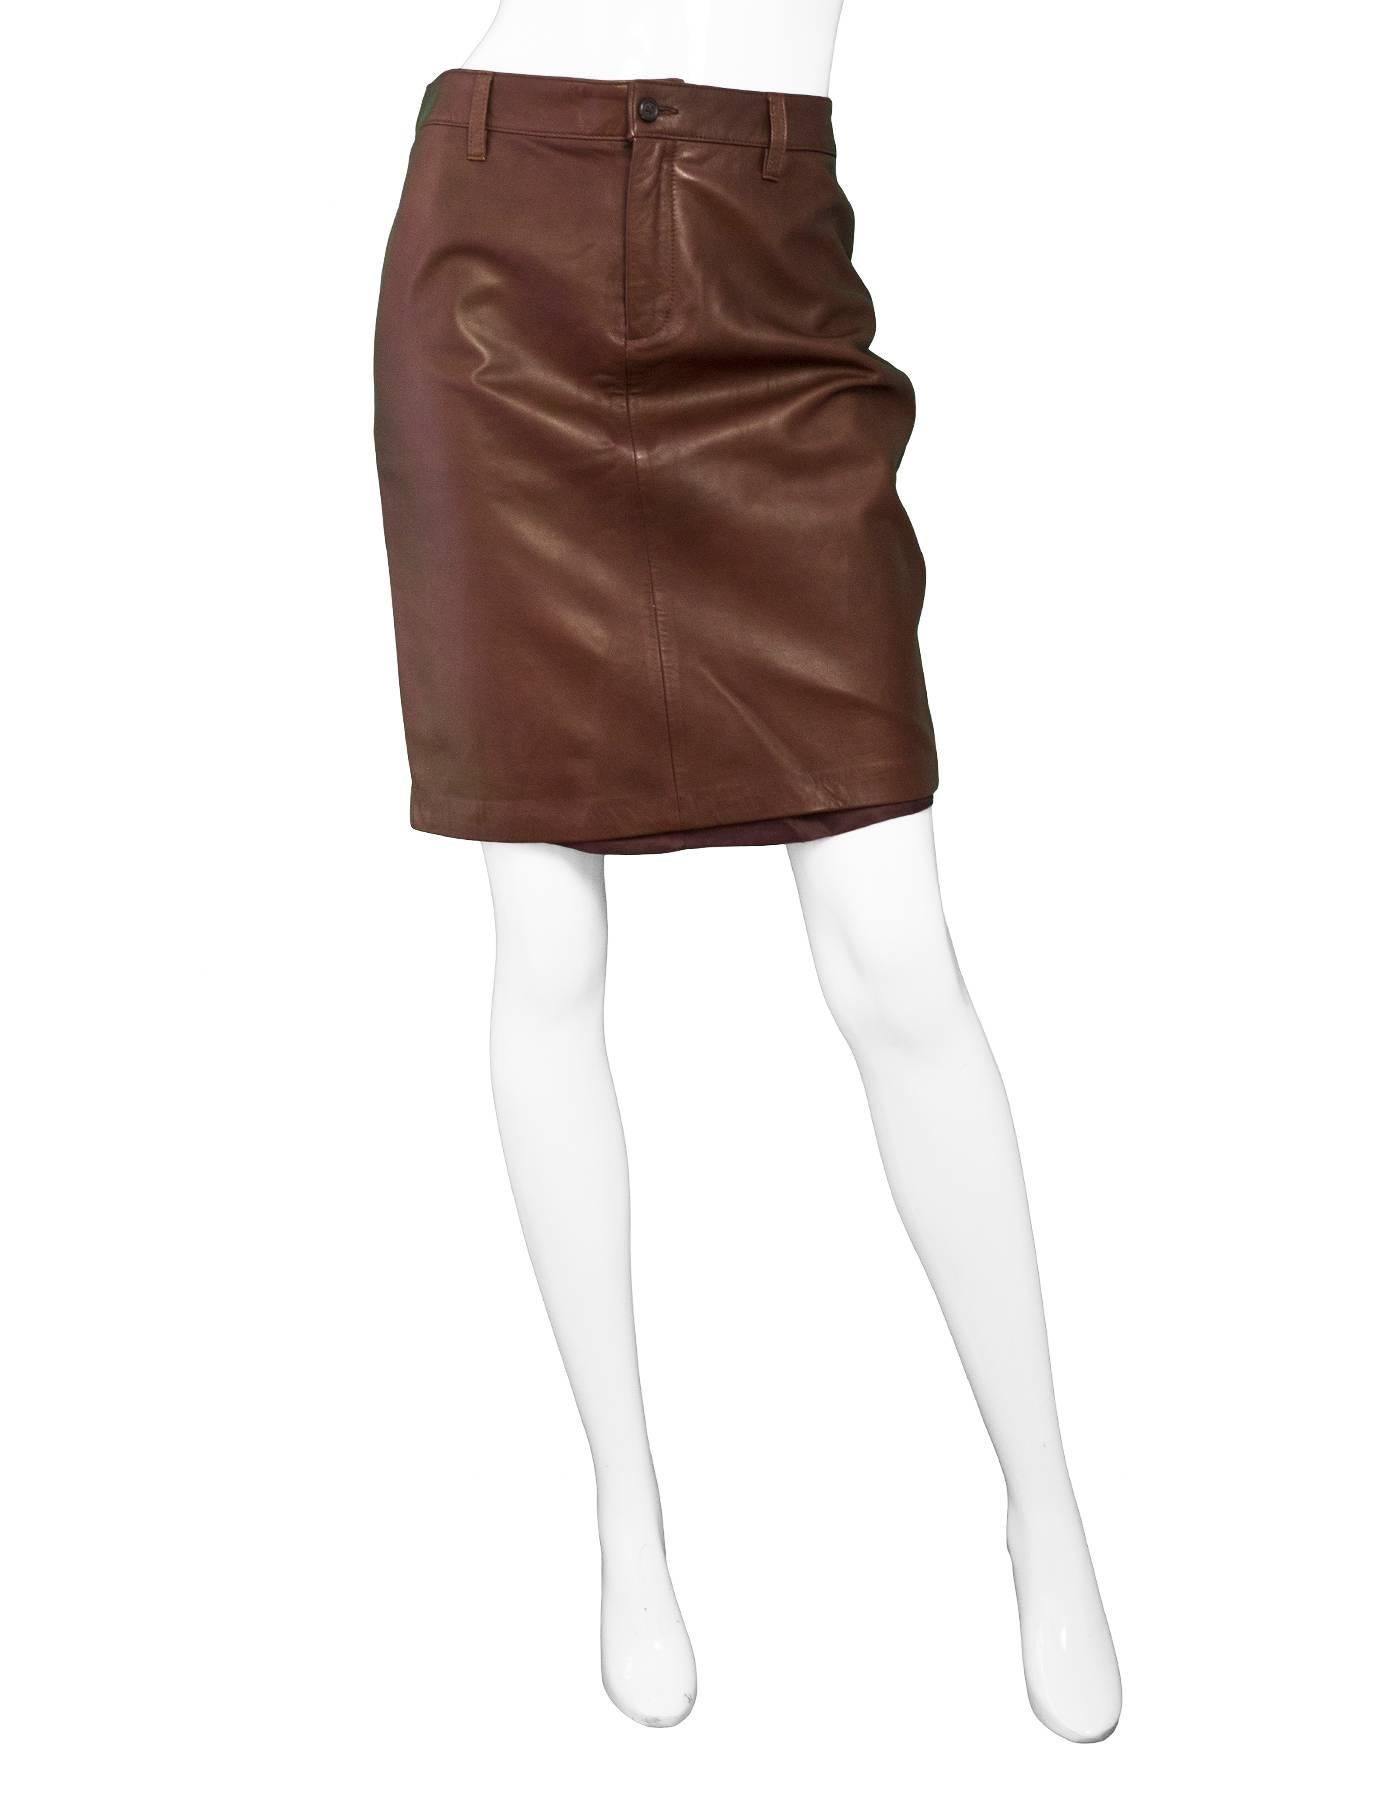 Ralph Lauren Brown Leather Skirt Sz 6 NWT

Made in: China
Color: Brown
Composition: 100% Leather
Lining: Brown viscose
Closure/opening: Front button and zip closure
Exterior Pockets: Back slit pockets
Interior Pockets: None
Retail Price: $500 +